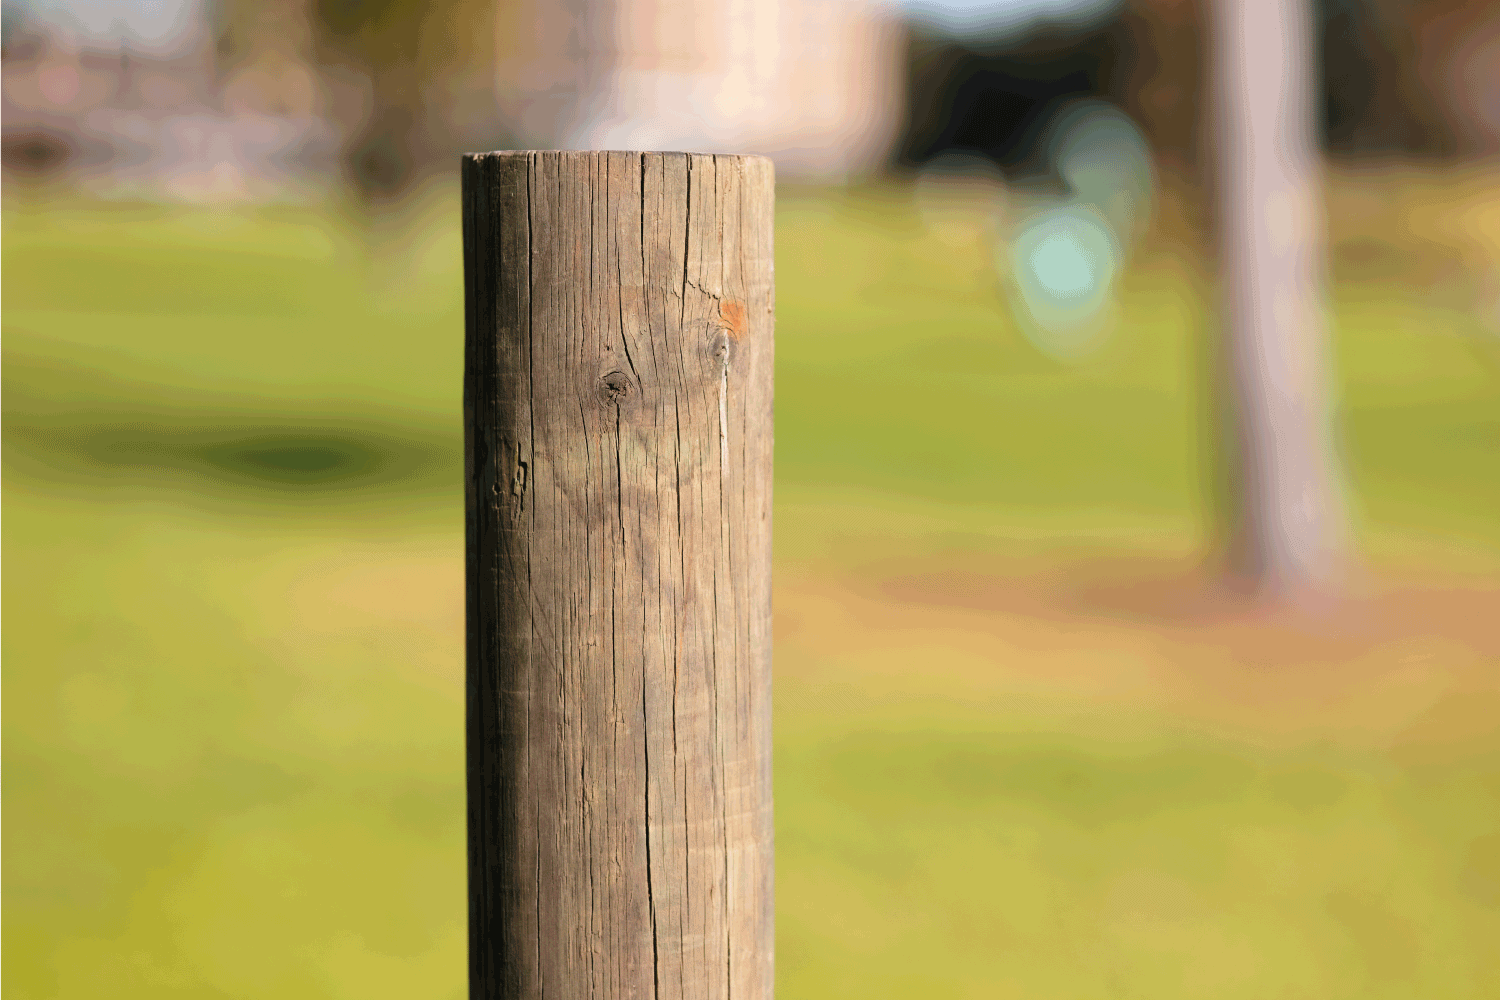 Part of a wooden post with grass behind